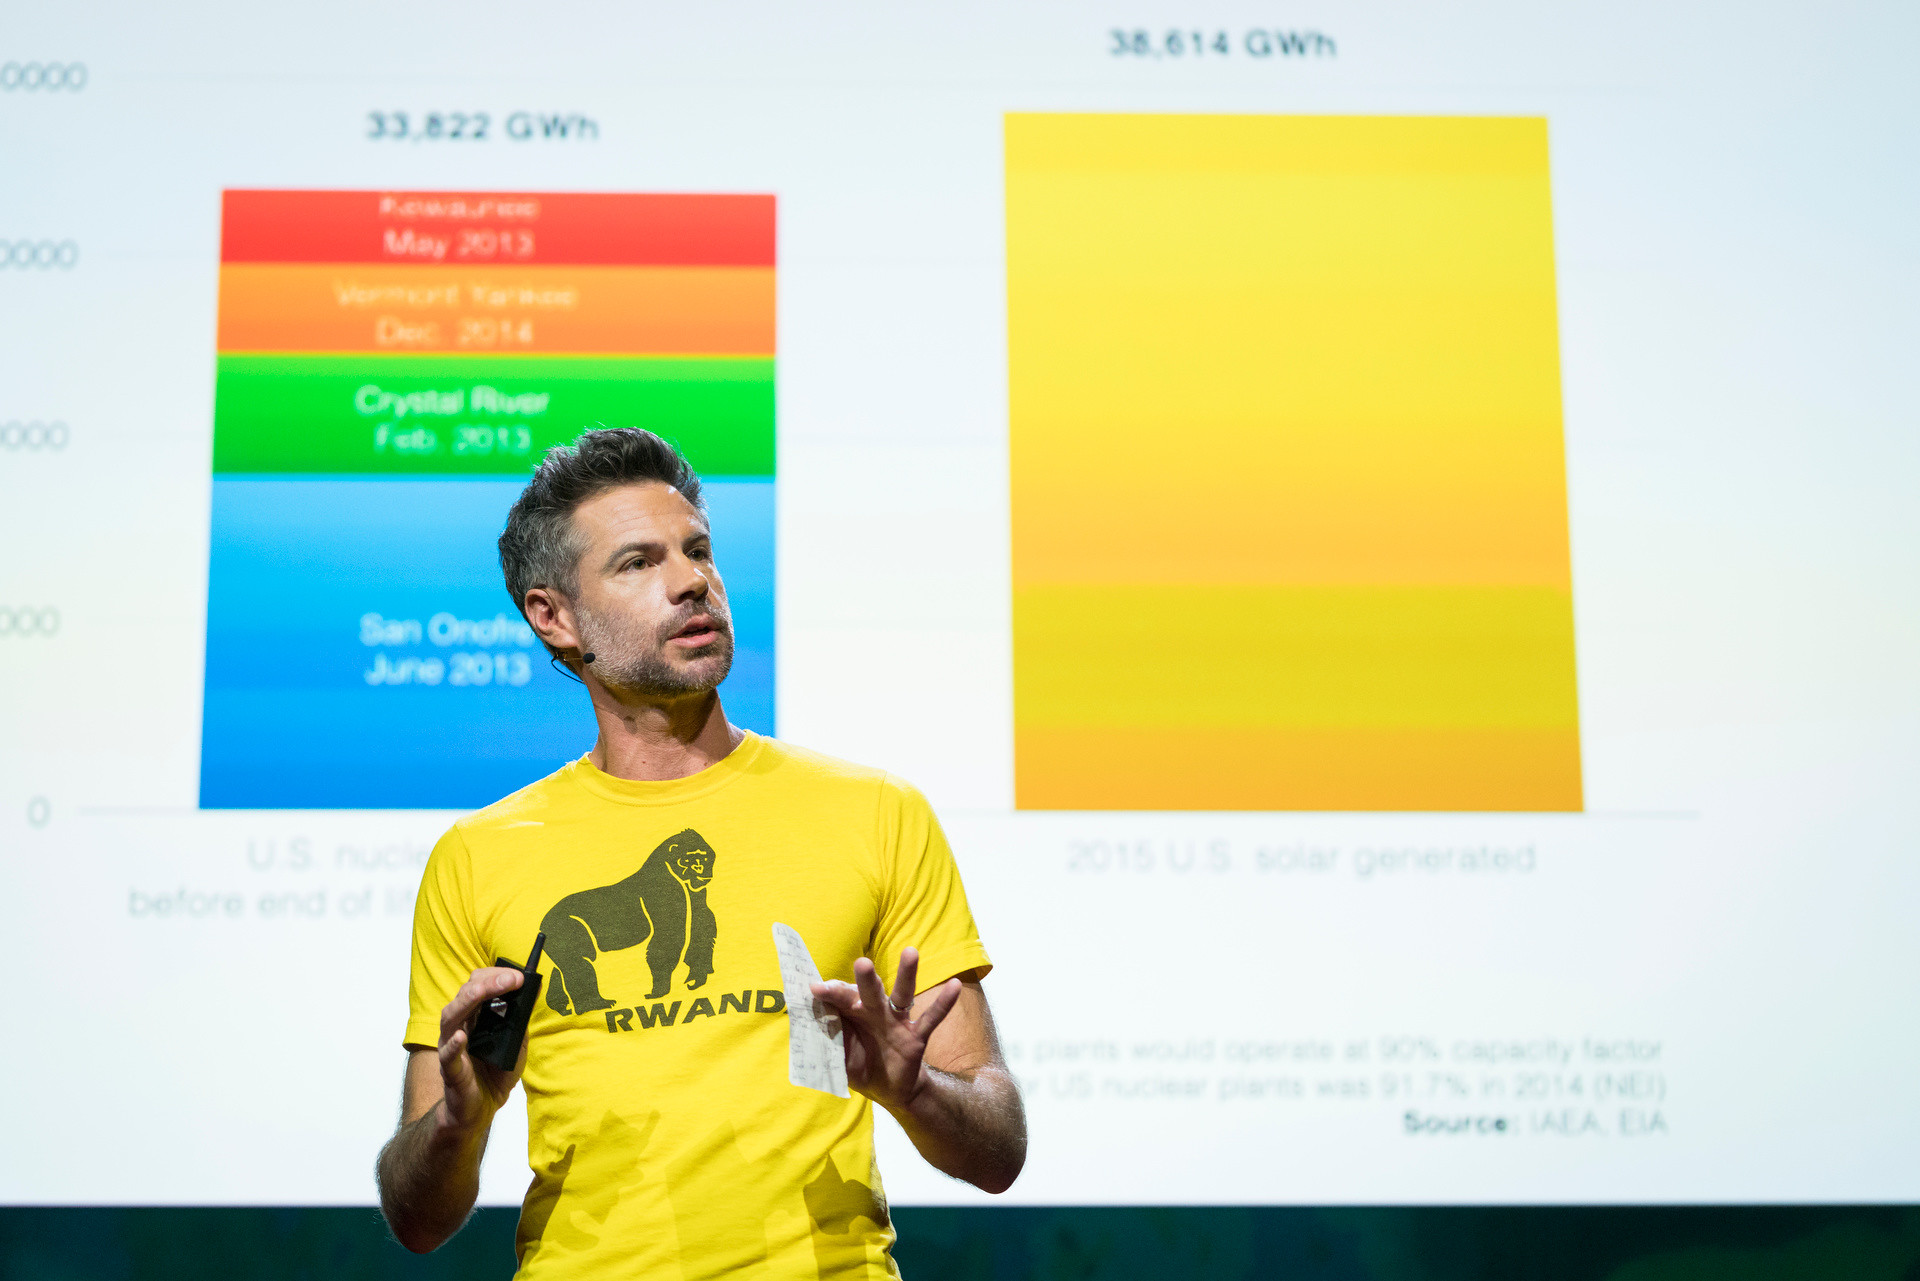 „We need to resist the apocalyptic environmental religion” — Interview with Michael Shellenberger